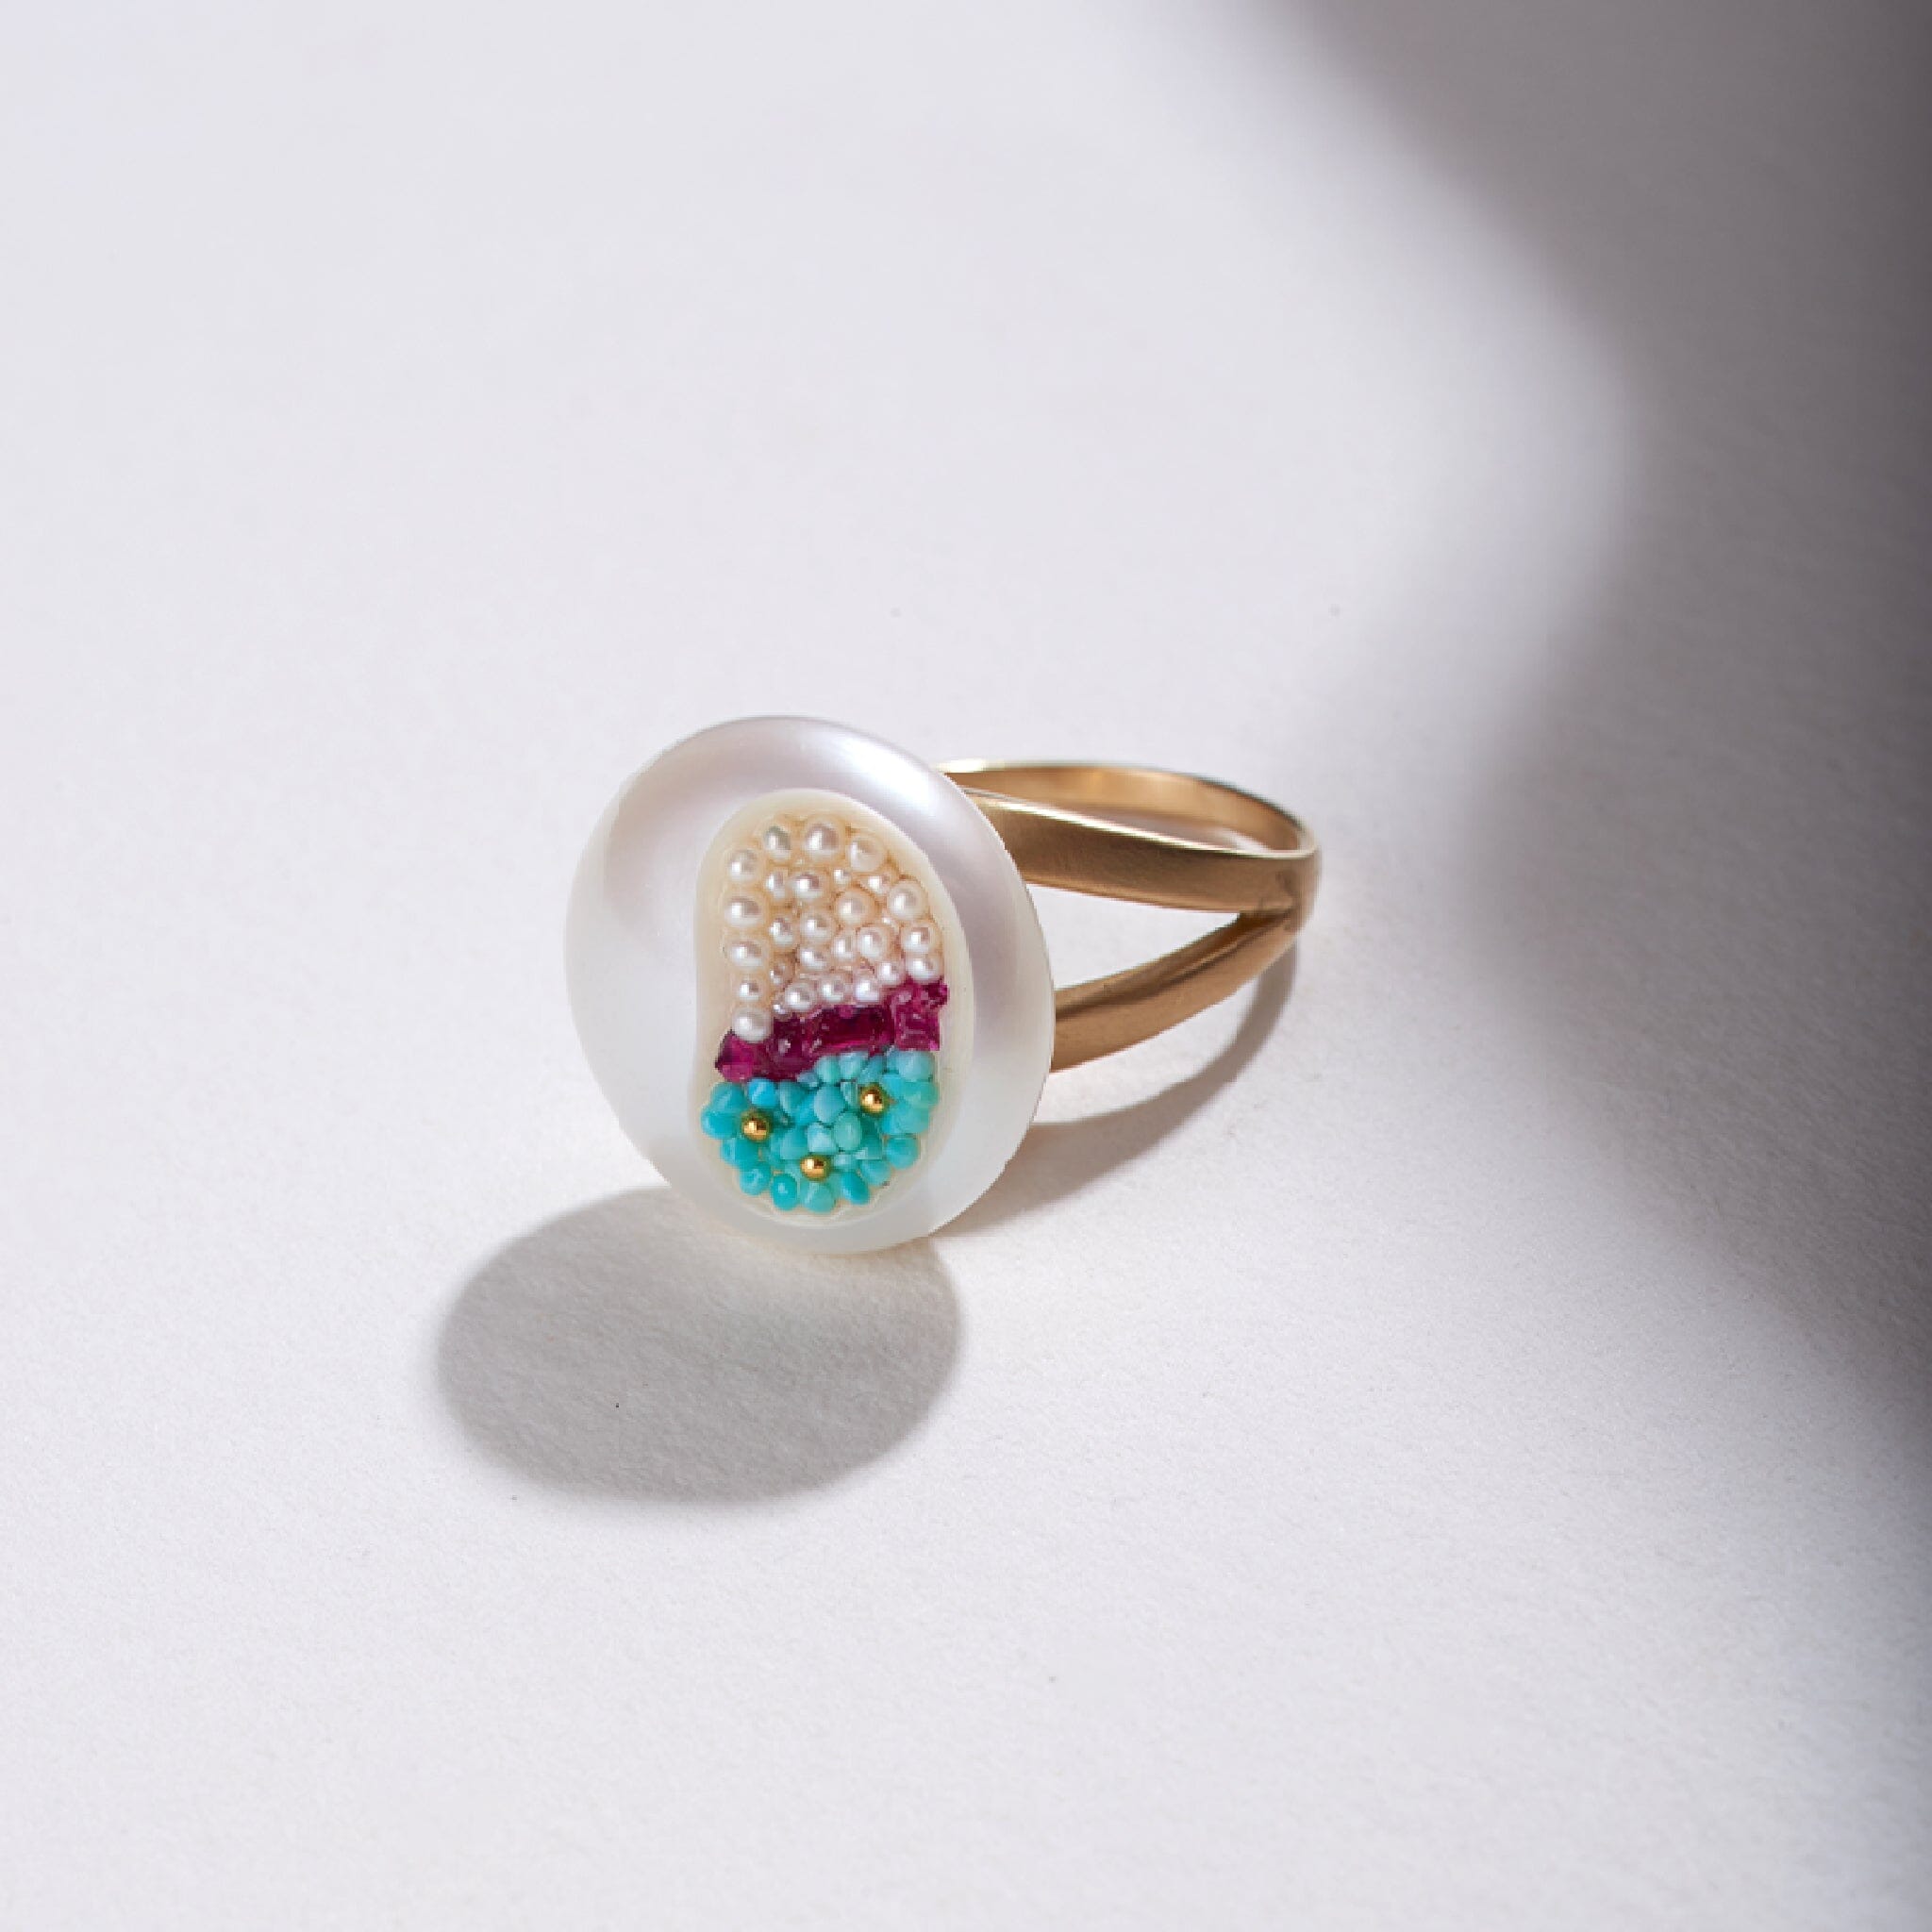 Freshwater Coin Pearl Finestrino Ring With Turquoise, Ruby, Seed Pearls and 22K Gold Beads